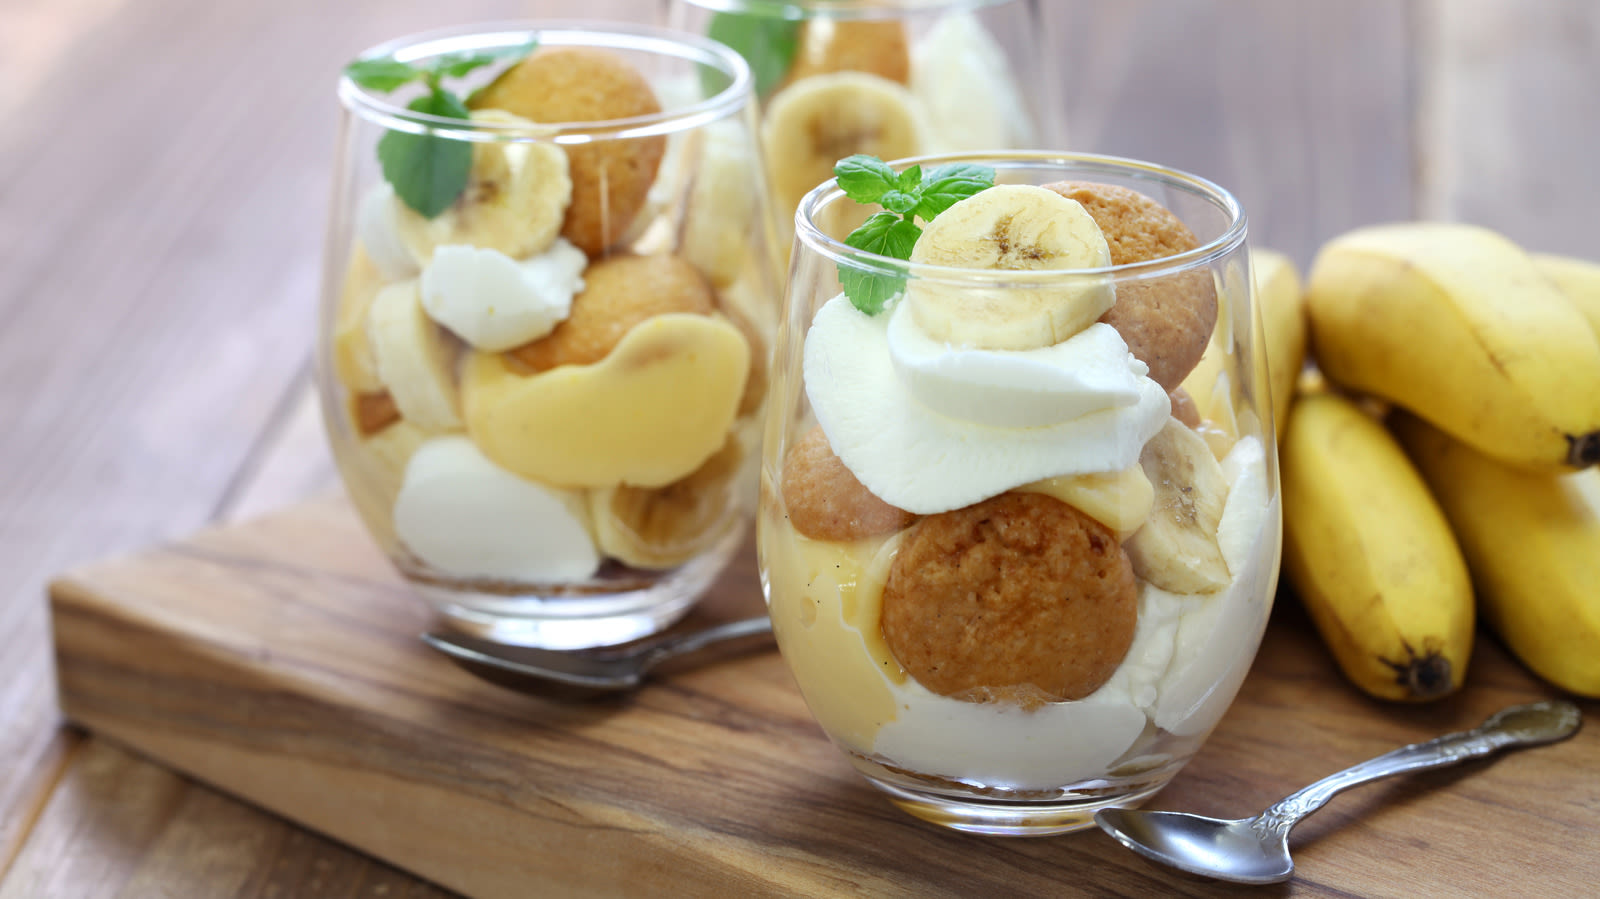 The Absolute Best Banana Pudding In The U.S., According To Dessert Lovers